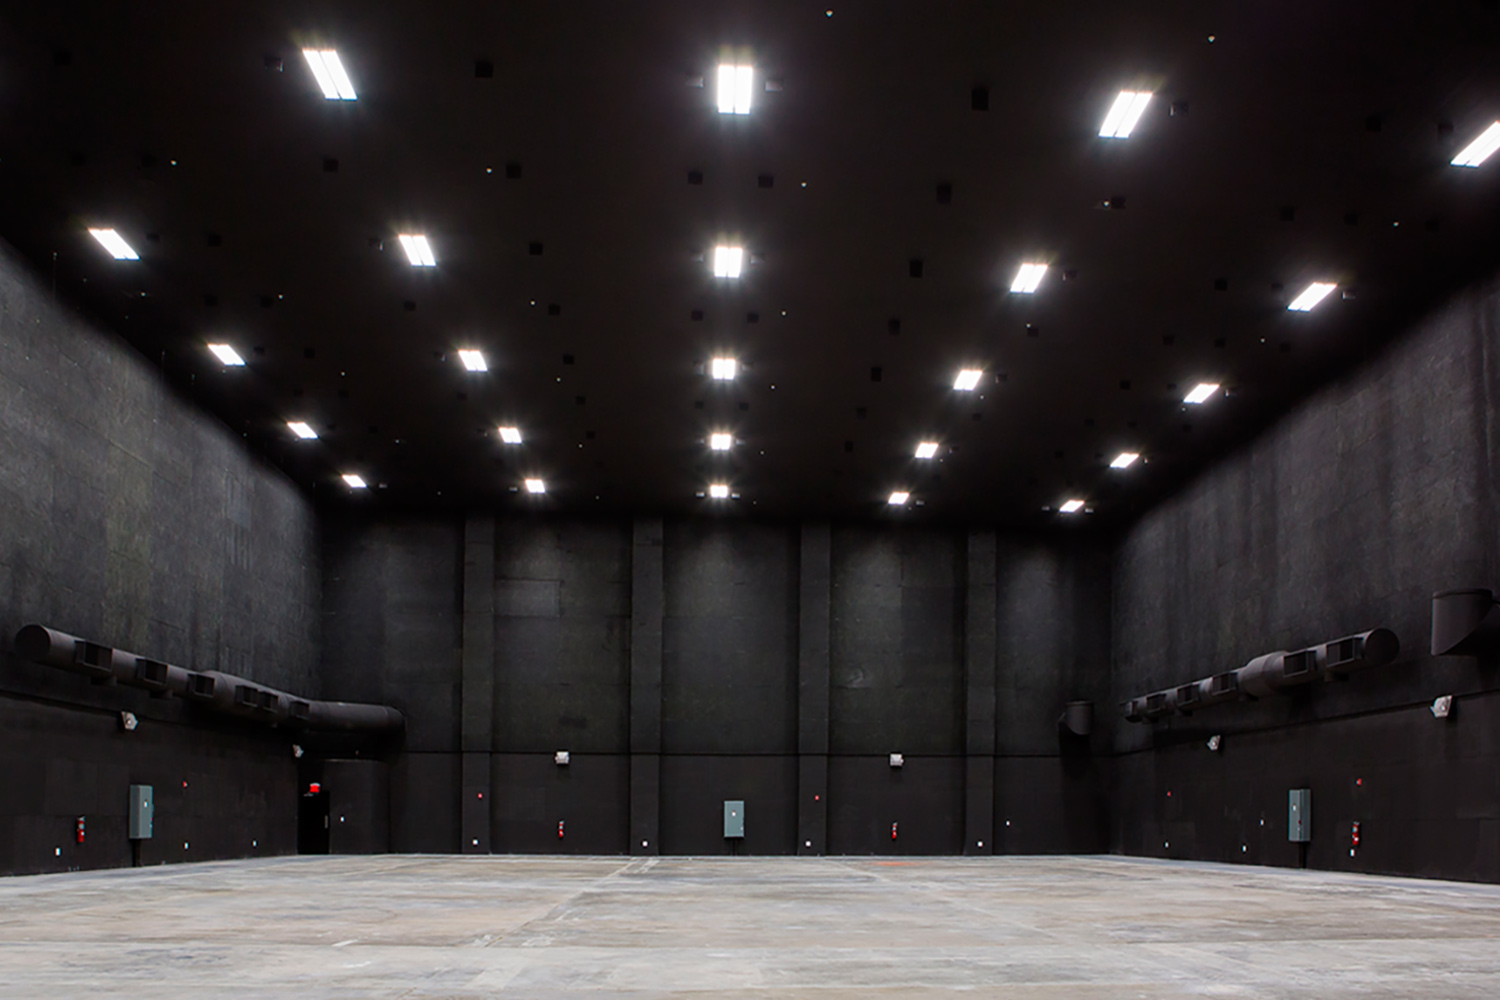 Viacom International/EUE/Screen Gems Studios recently completed construction on an 88,000 sq. ft. studio complex in Miami. WSDG was reached for an intensive feasibility study, cost/benefit analysis, and AV Systems Integration. Main area.